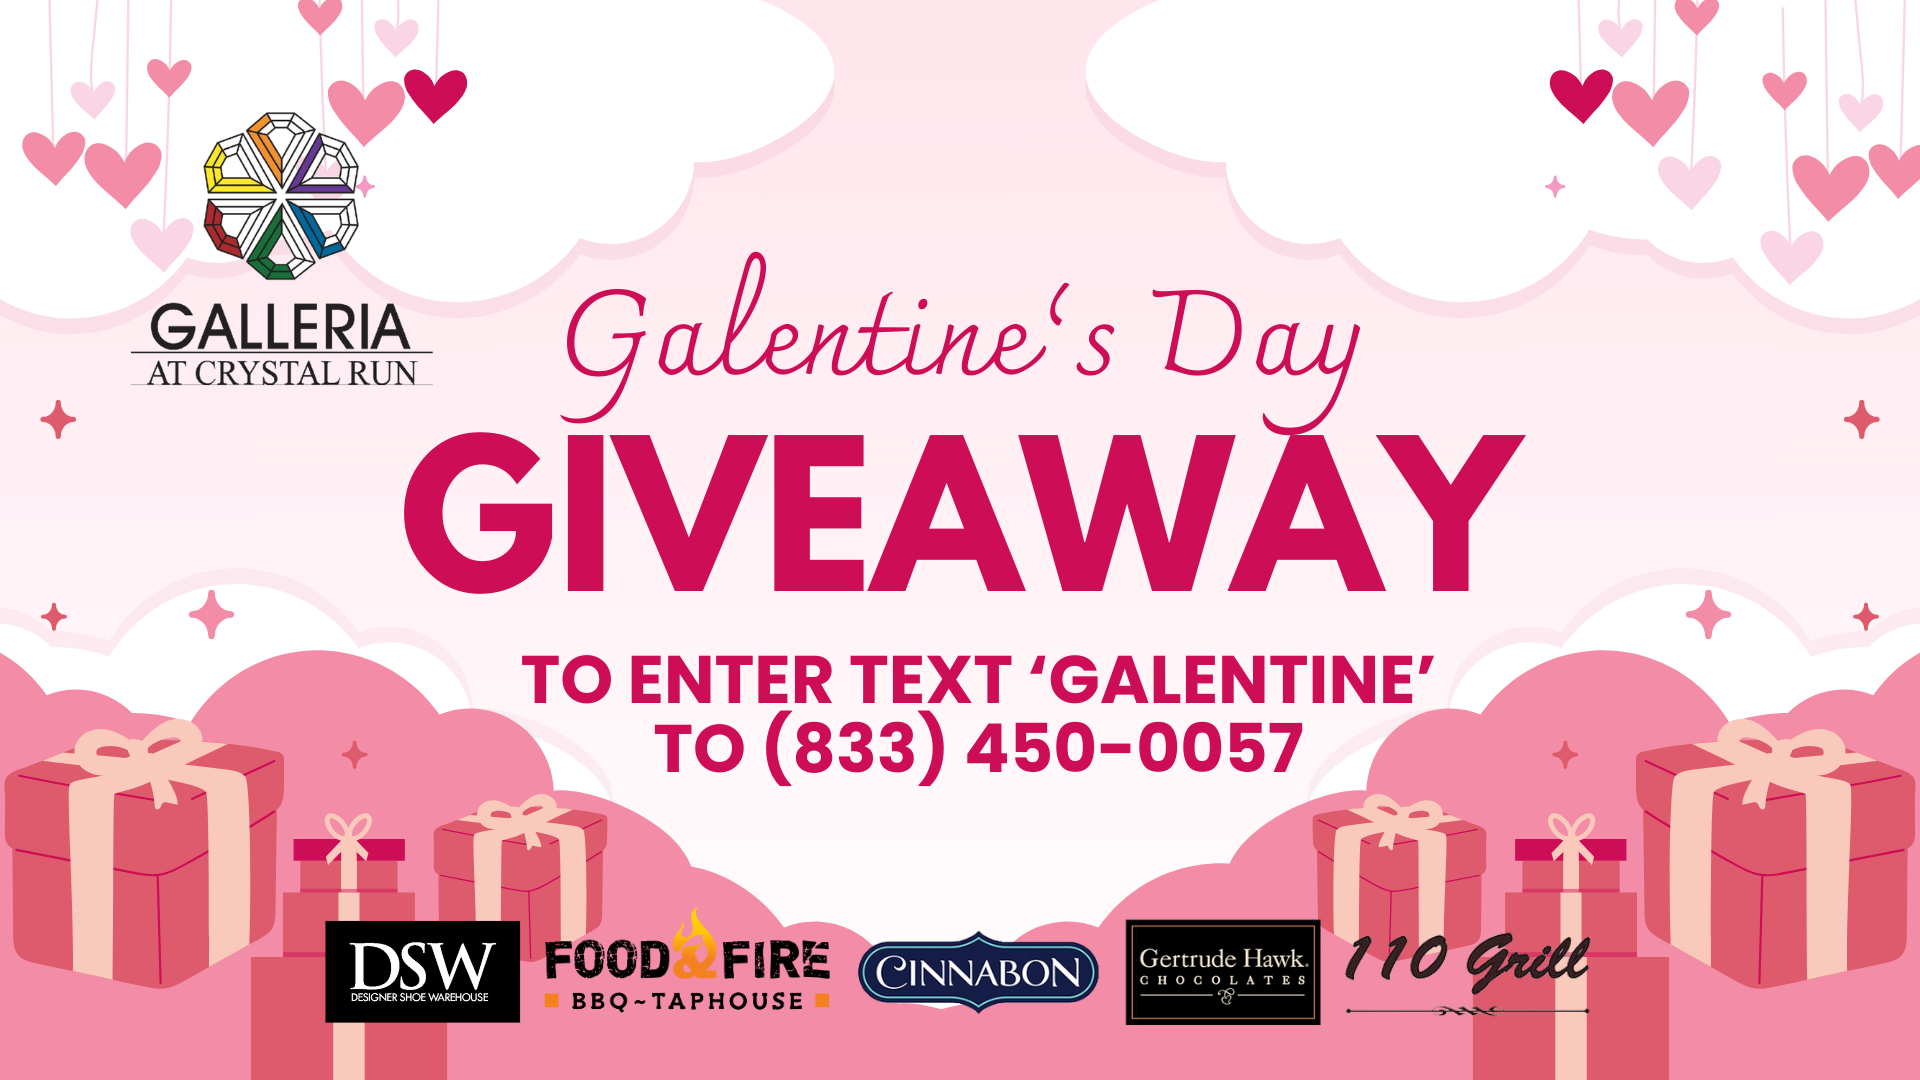 SOCIAL GALENTINES DAY GIVEAWAY 1920 x 1080 px 1